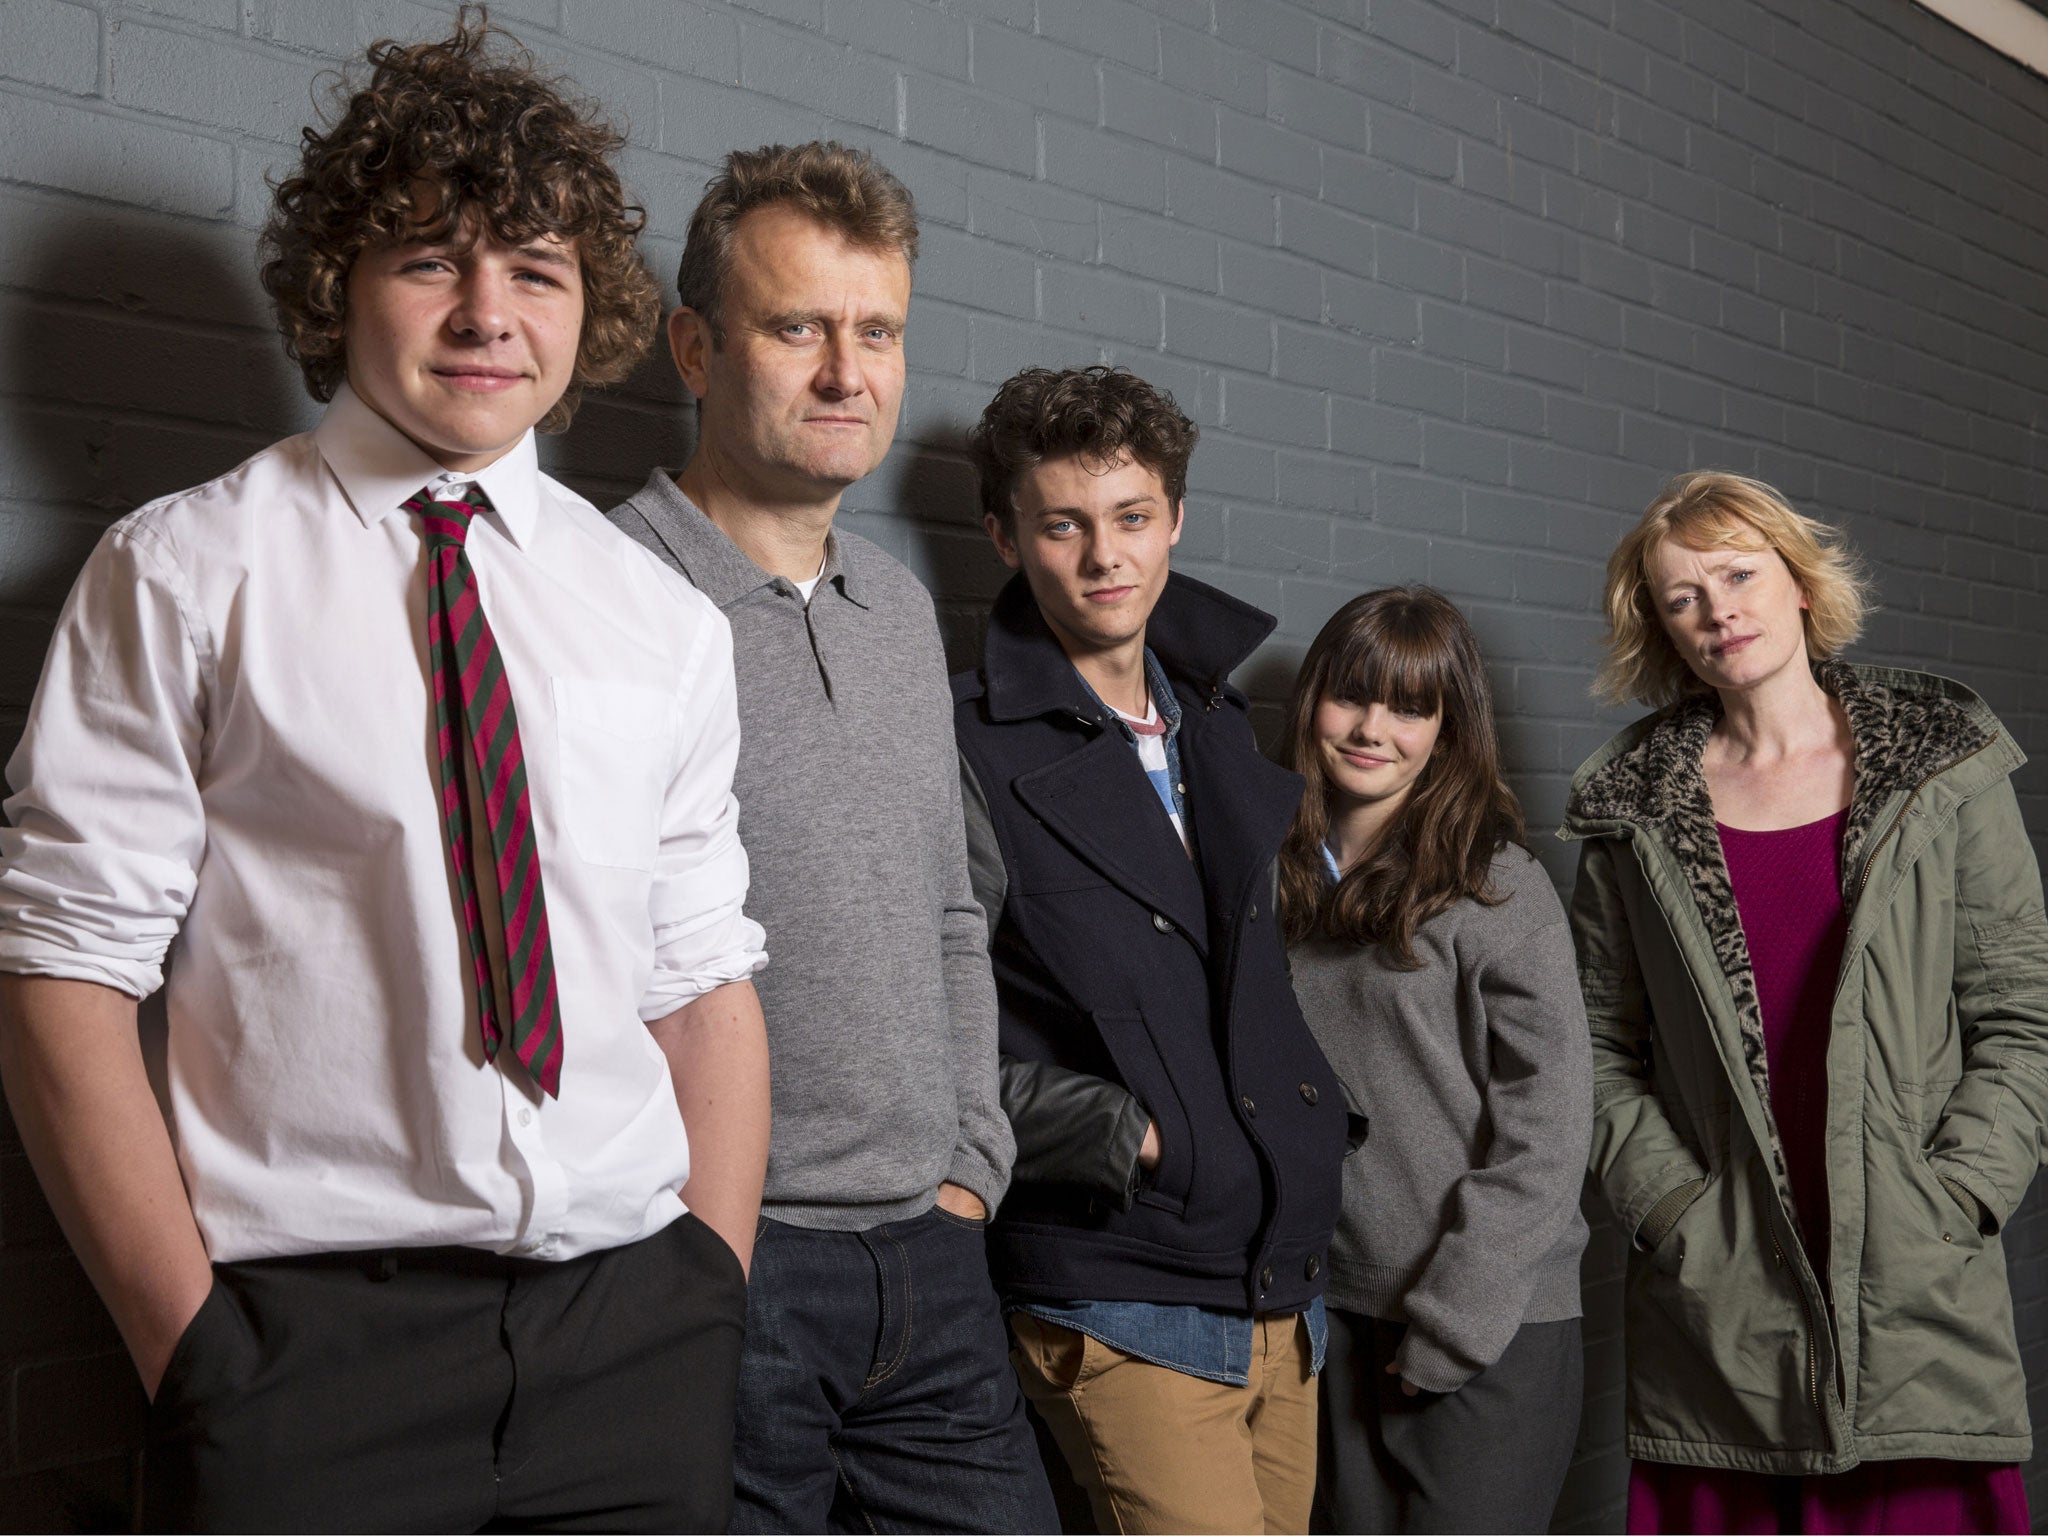 Catch Outnumbered tonight at 9pm on BBC1, starring Daniel Roche, Hugh Dennis, Tyger Drew-Honey, Ramona Marquez and Claire Skinner